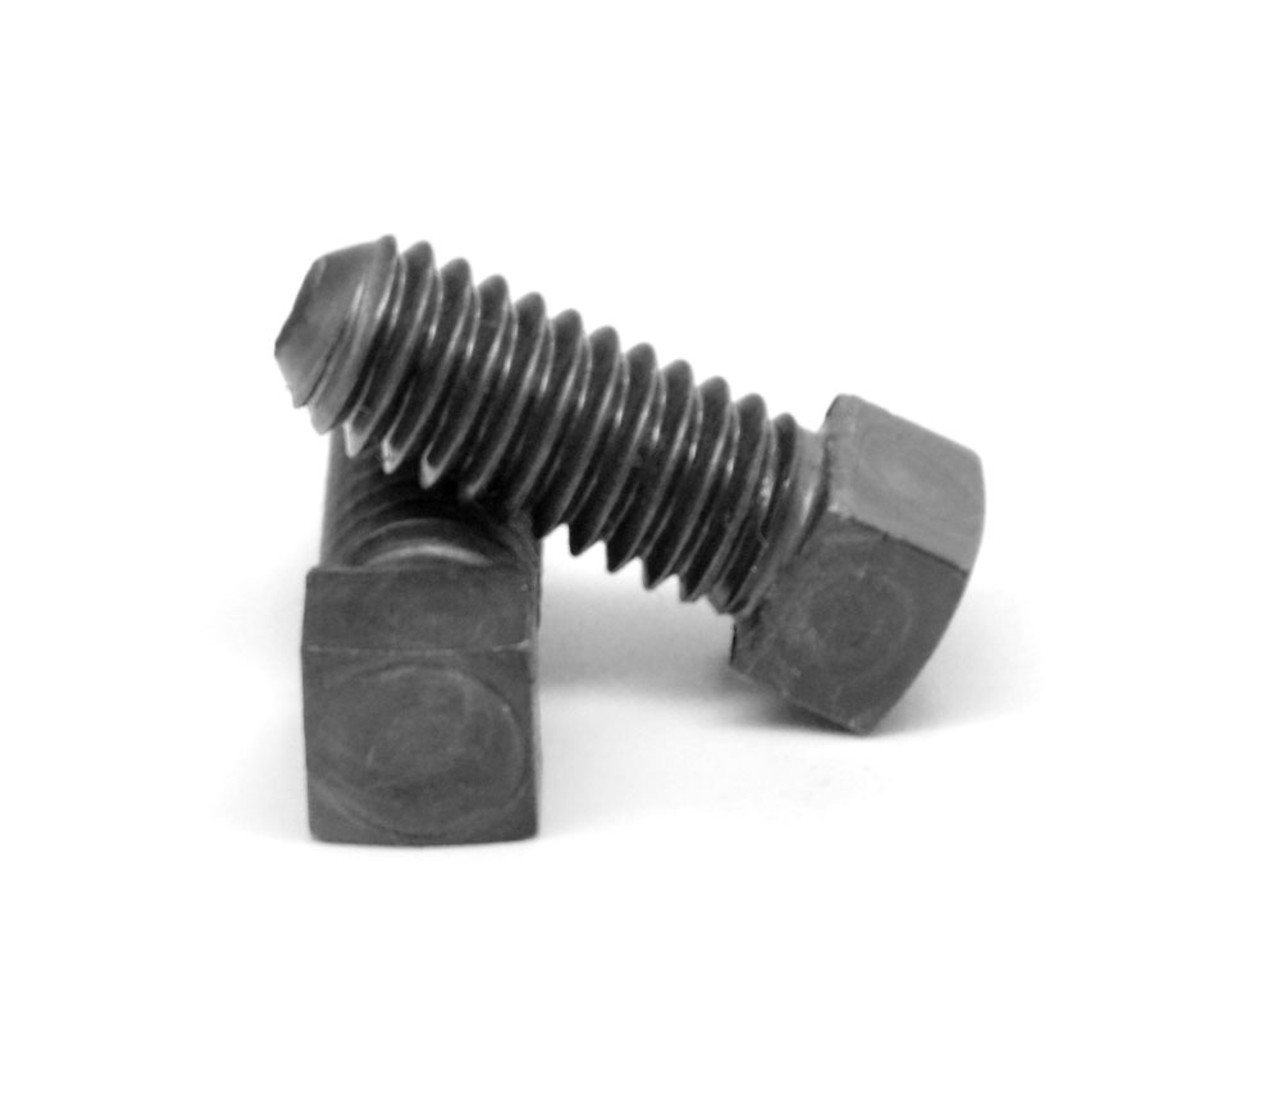 5/8"-11 x 1 1/2" (FT) Coarse Thread Square Head Set Screw Oval Point Low Carbon Steel Case Hardened Plain Finish